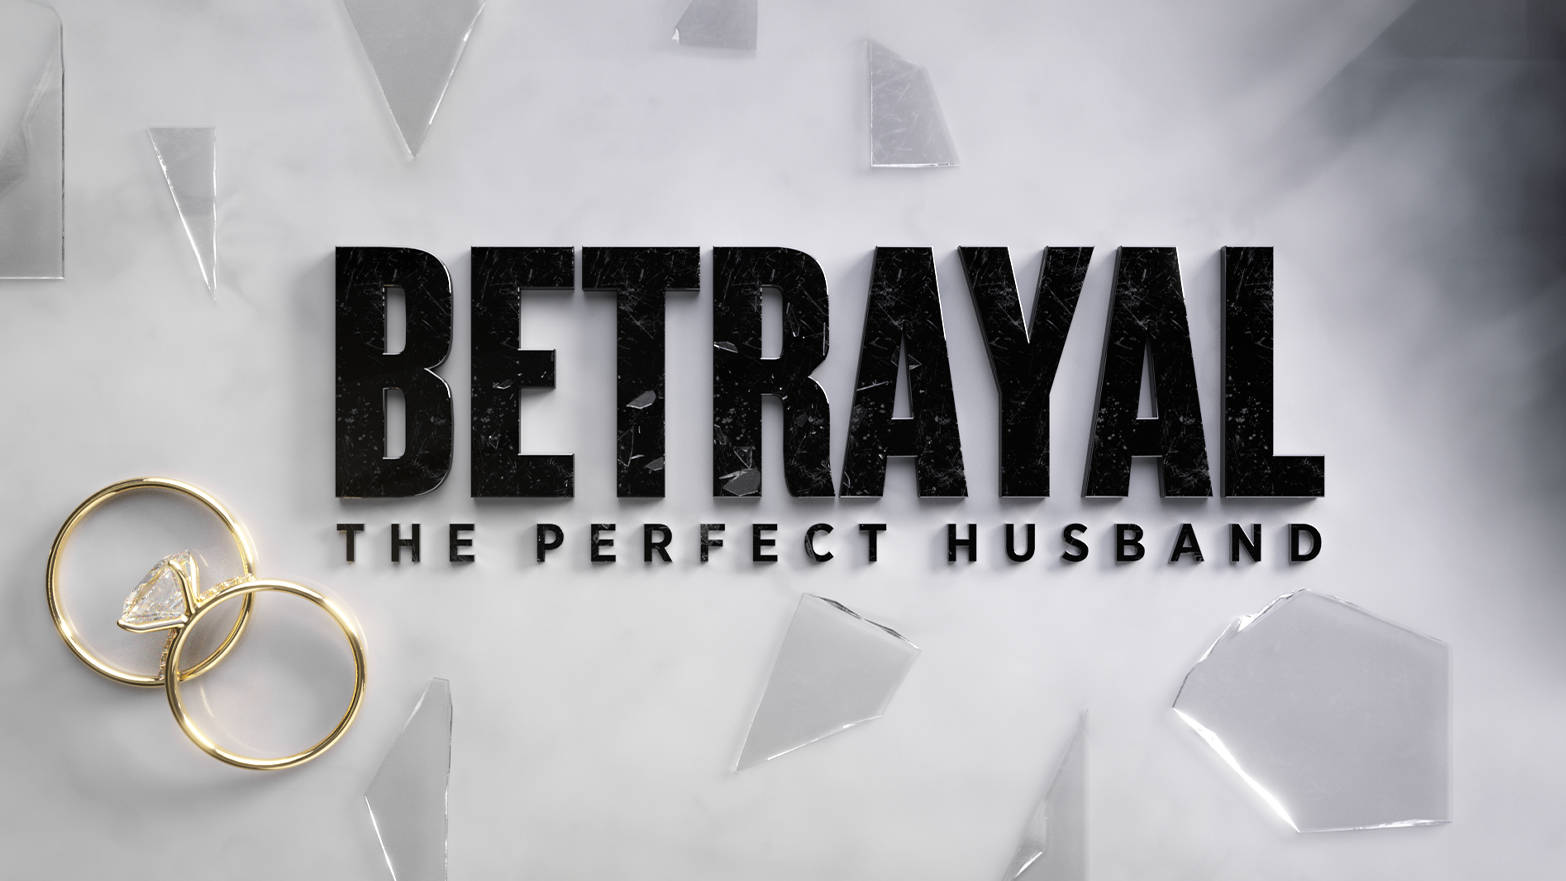 TV Show Graphic for Betrayal, The Perfect Husband